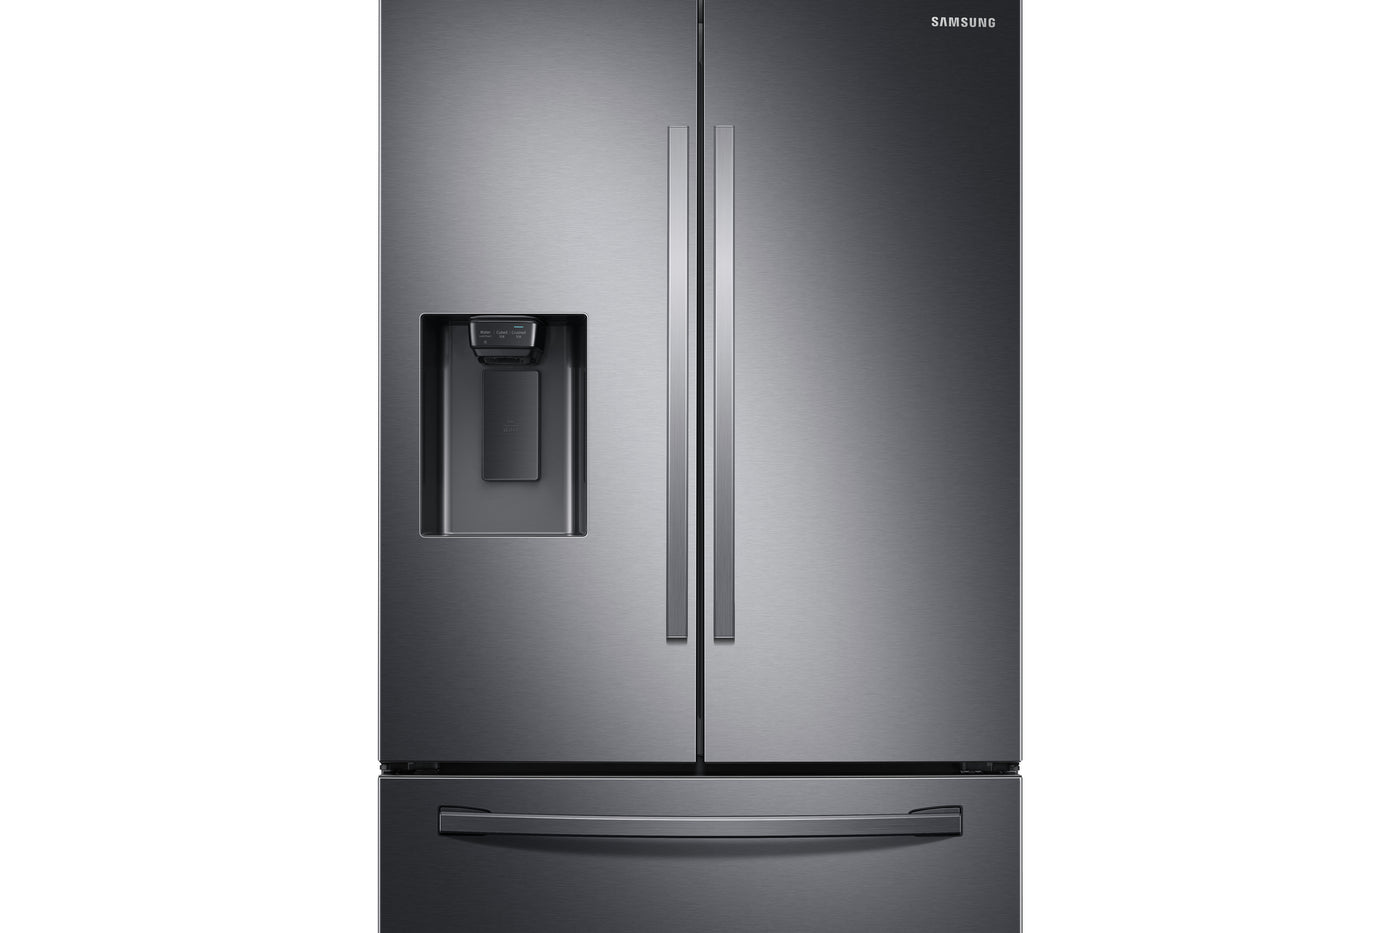 Samsung Black Stainless Steel French Door Refrigerator (27 Cu.Ft) - RF27T5201SG/AA